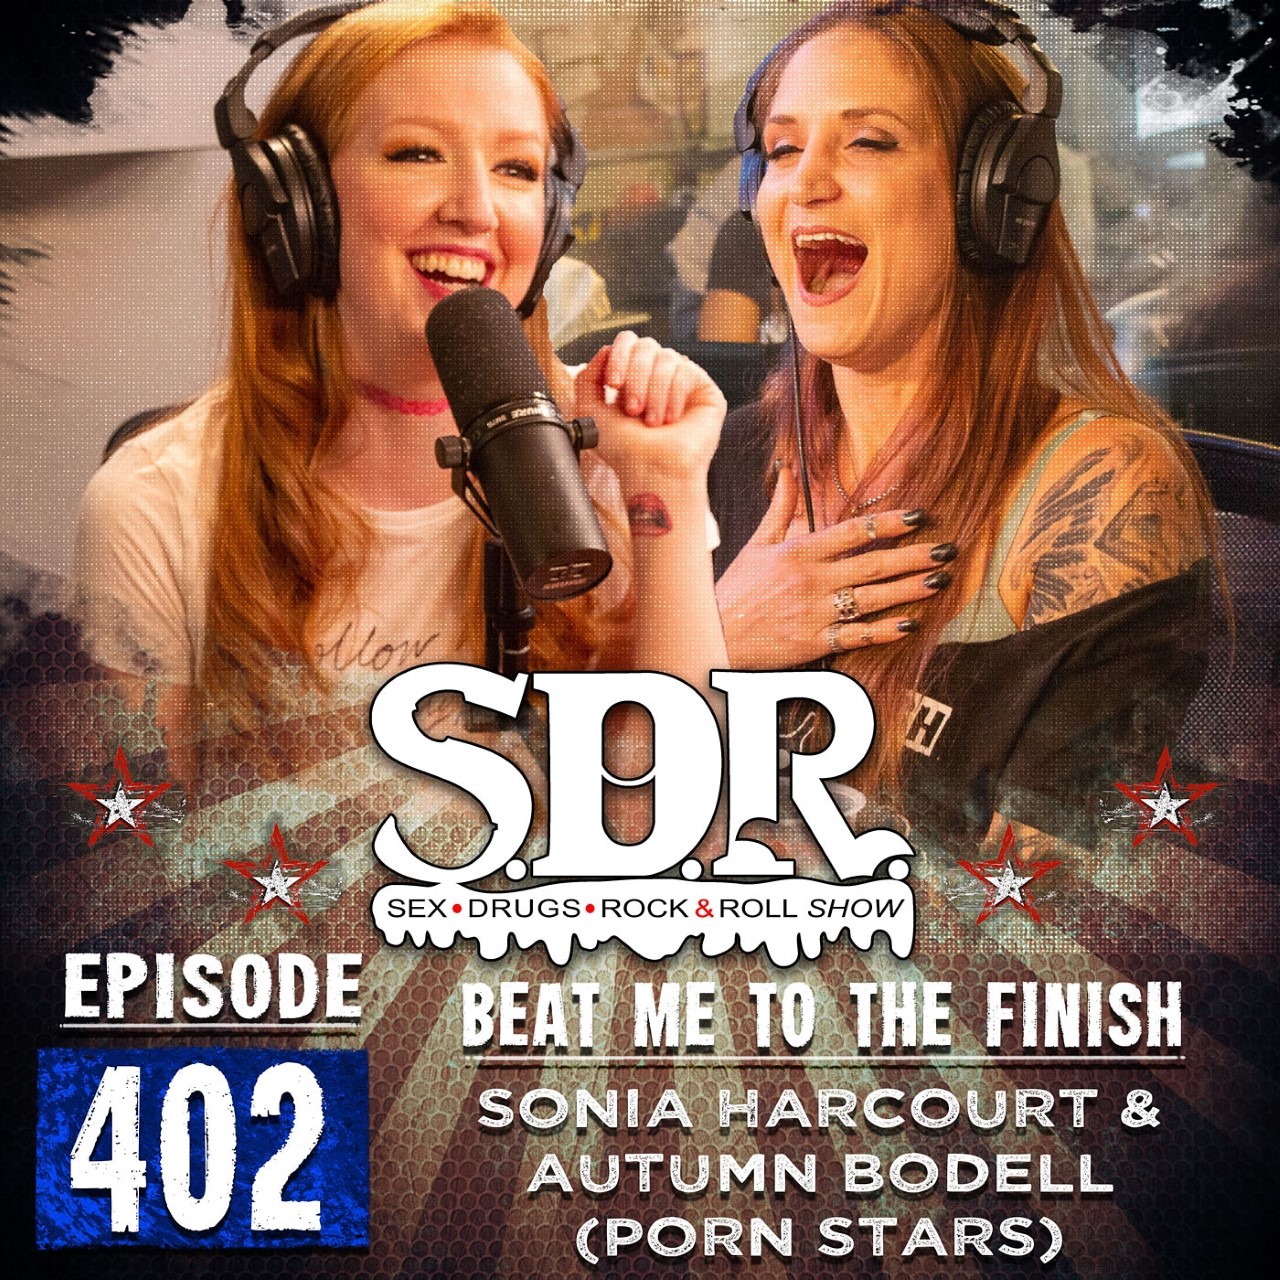 OhMiBod Kiiroo Featured on The SDR Show “Beat Me To The Finish” Sponsored by Dallas Novelty Featuring Sonia Harcourt & Autumn Bodell